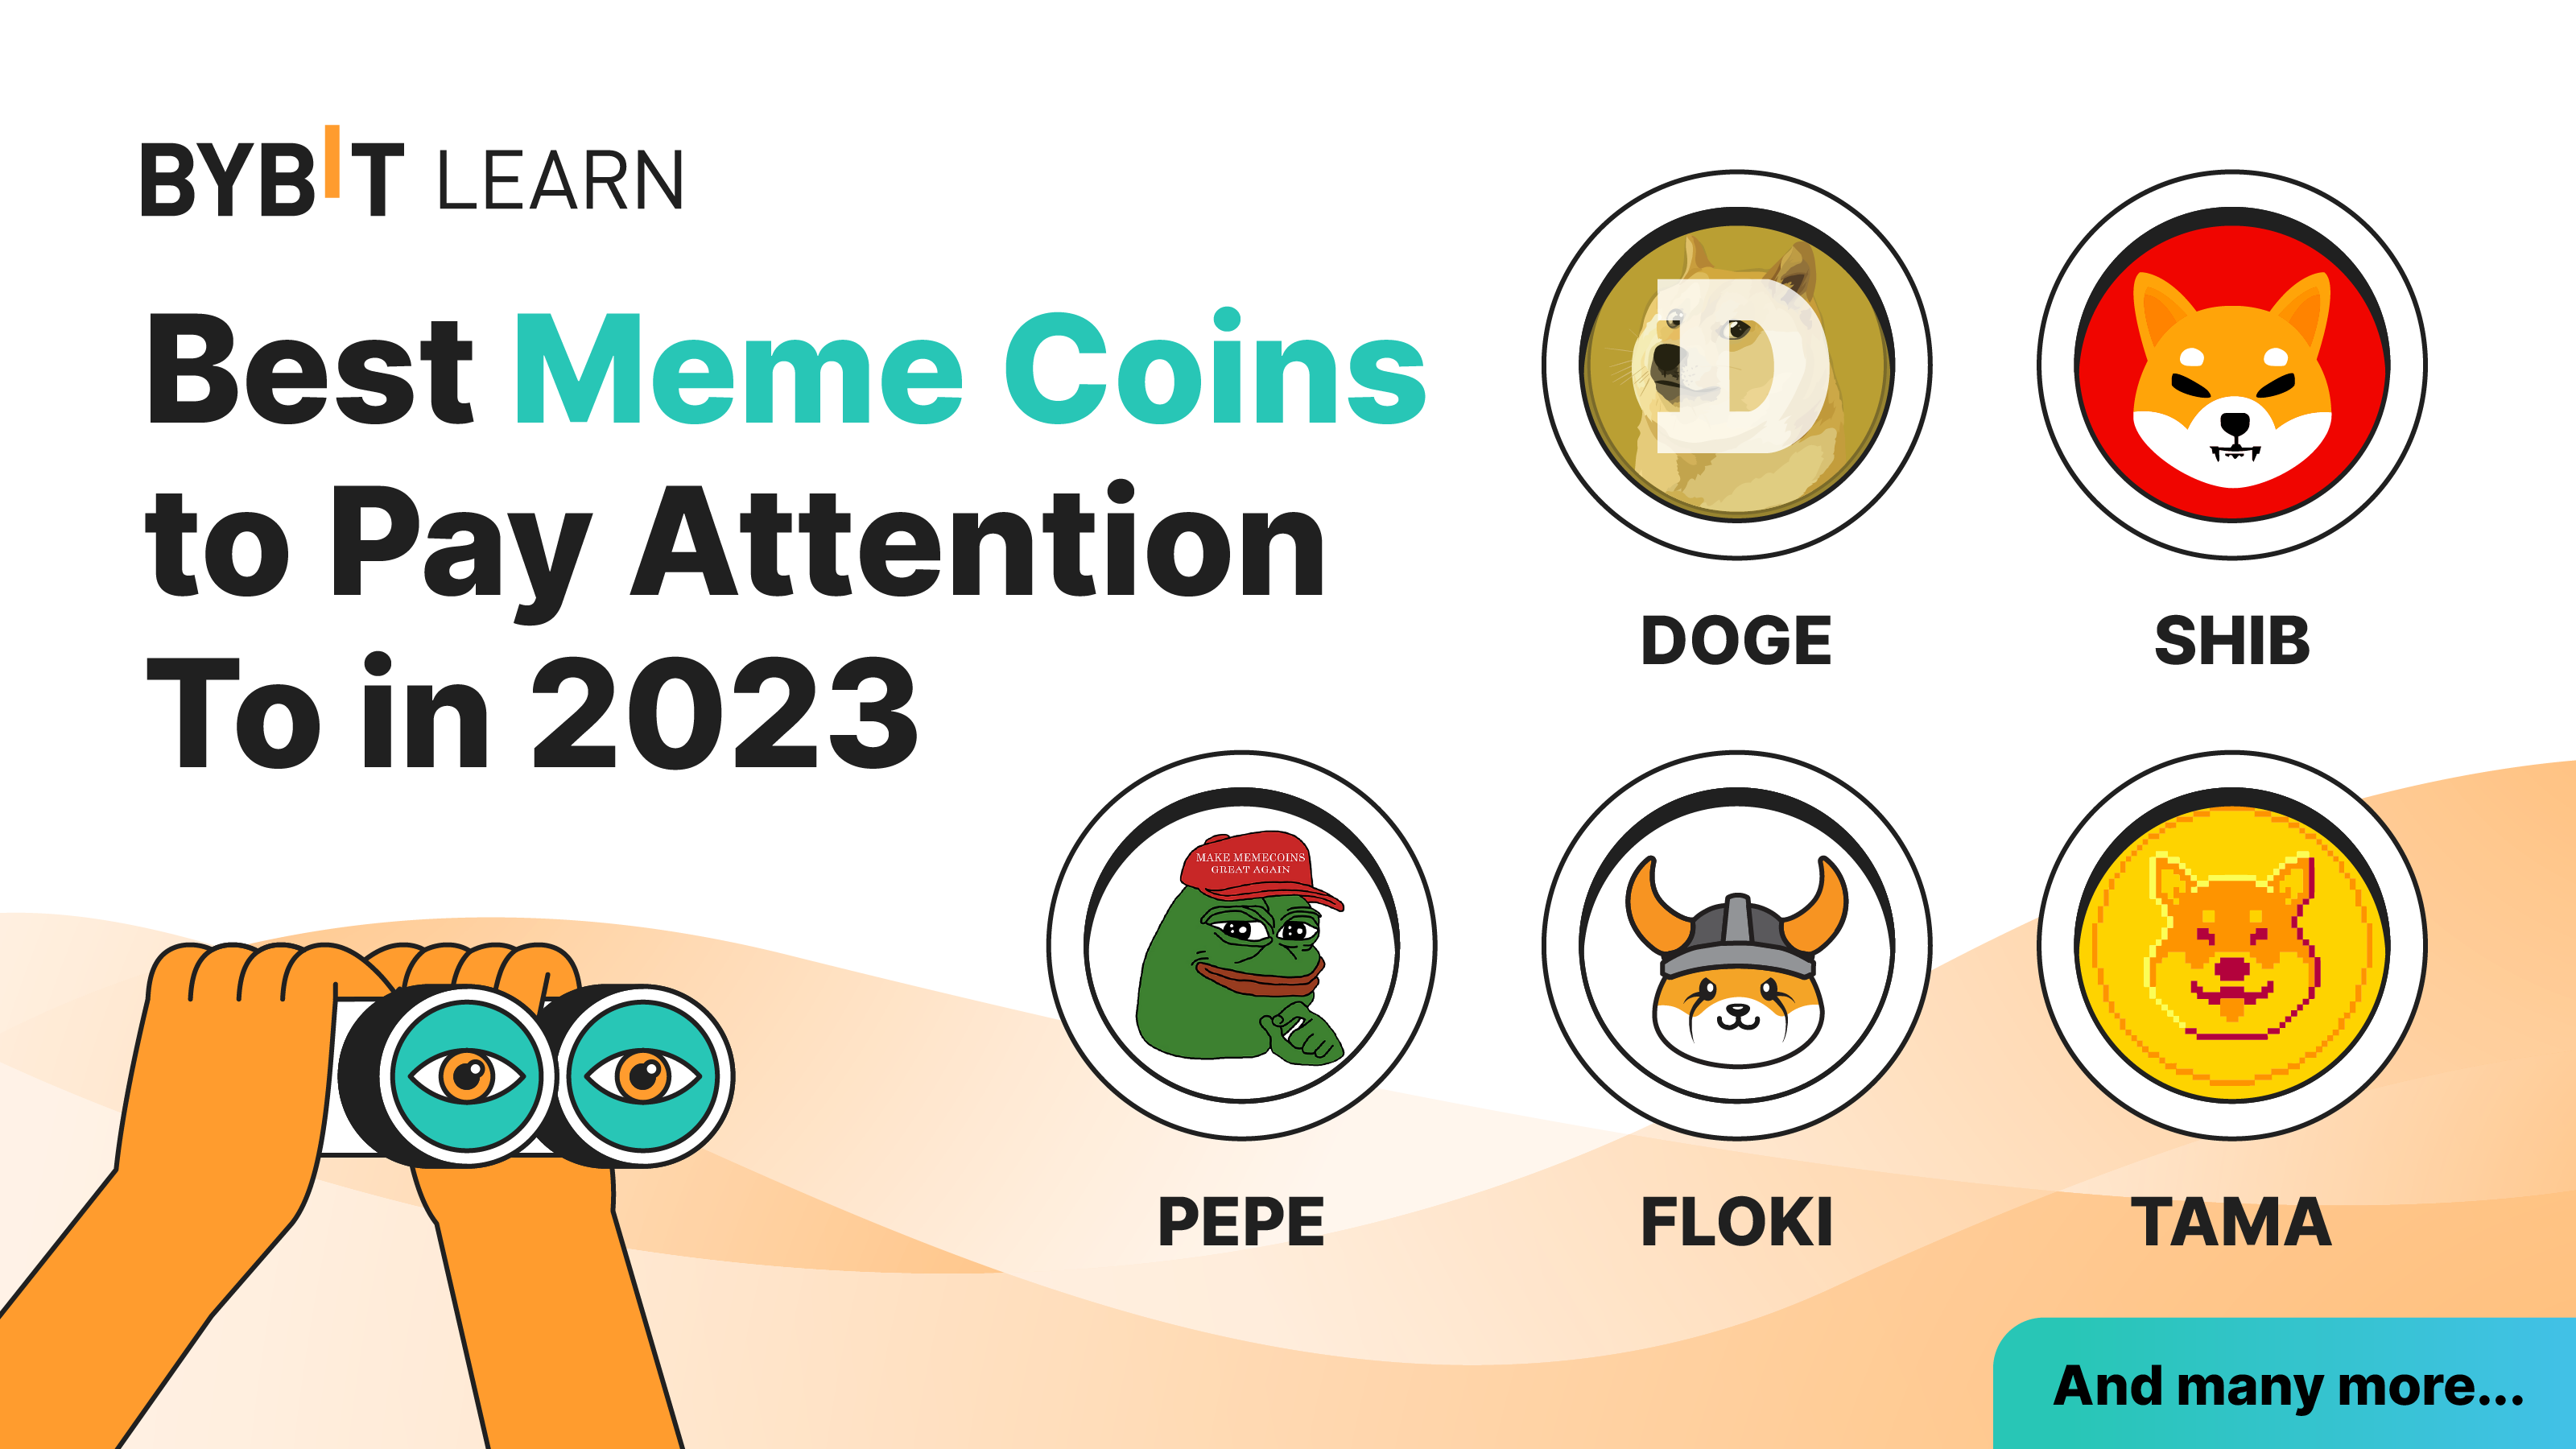 Create Your Own Meme Coin in Less Than 1 Minute